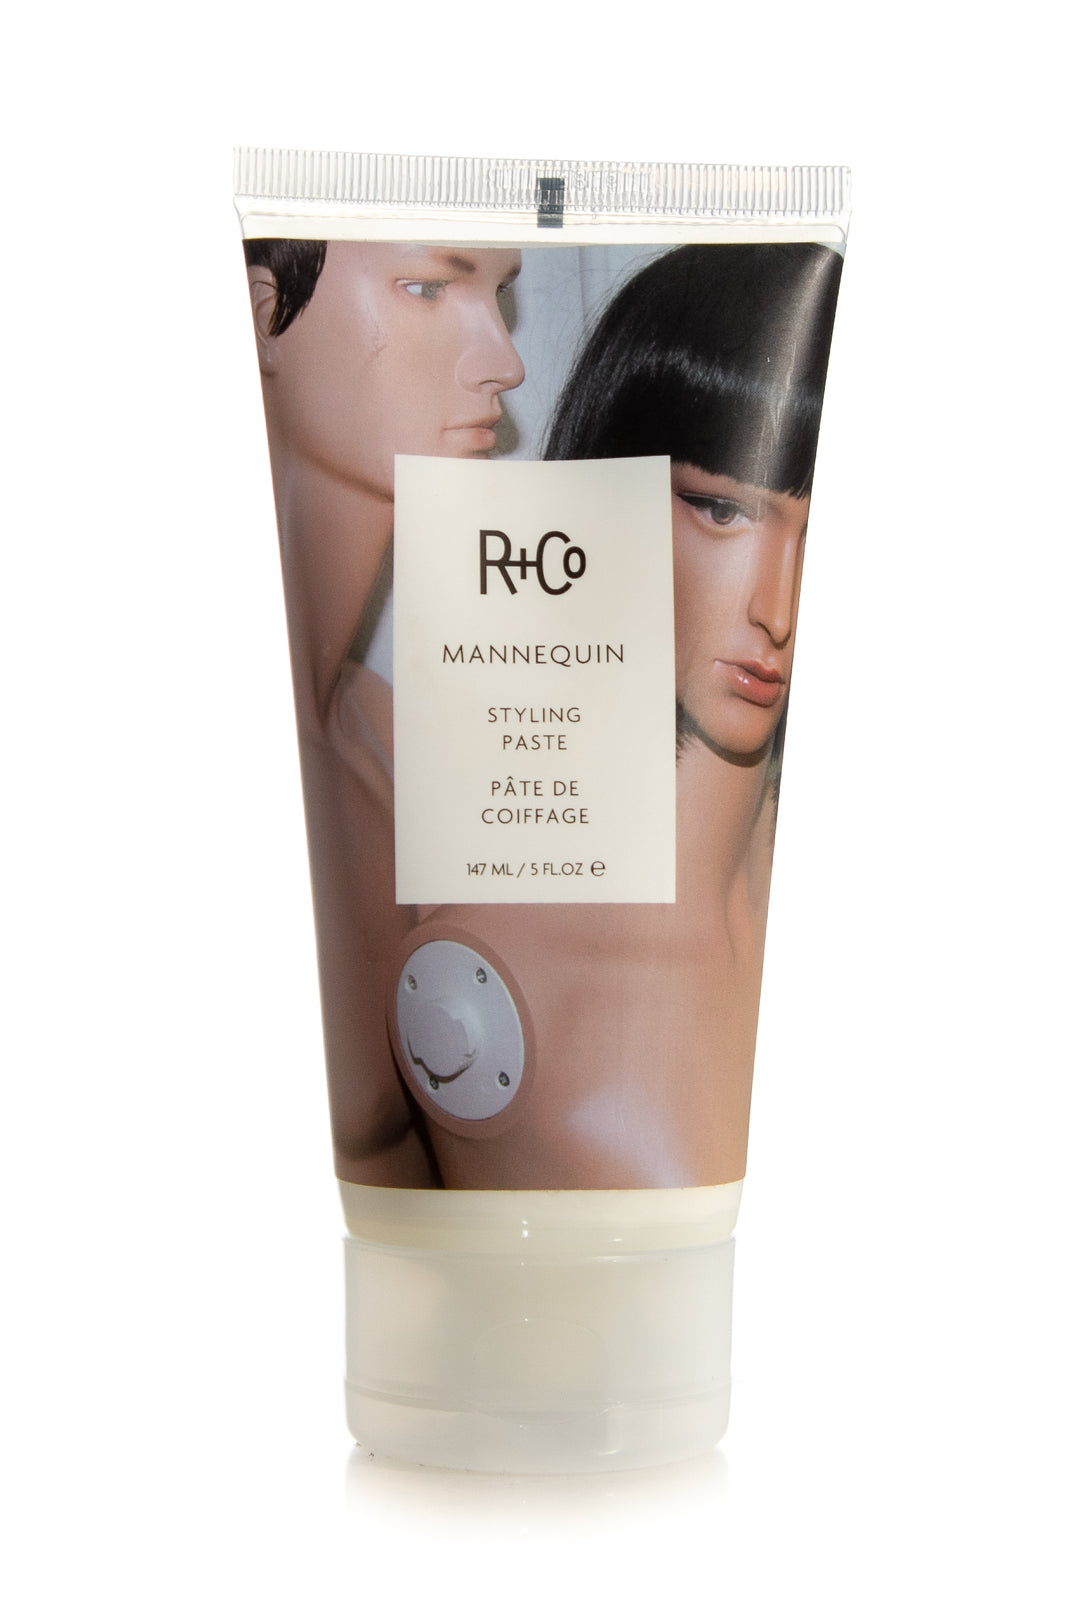 Mannequin is a messy, matte, sexy styling paste.  A natural-looking styling paste for volume, flexibility and shape.   Perfect for looking like you just rolled out of bed but weren't asleep, not even for a second. Achieve that supermodel hair style with this styling paste from R+Co.  